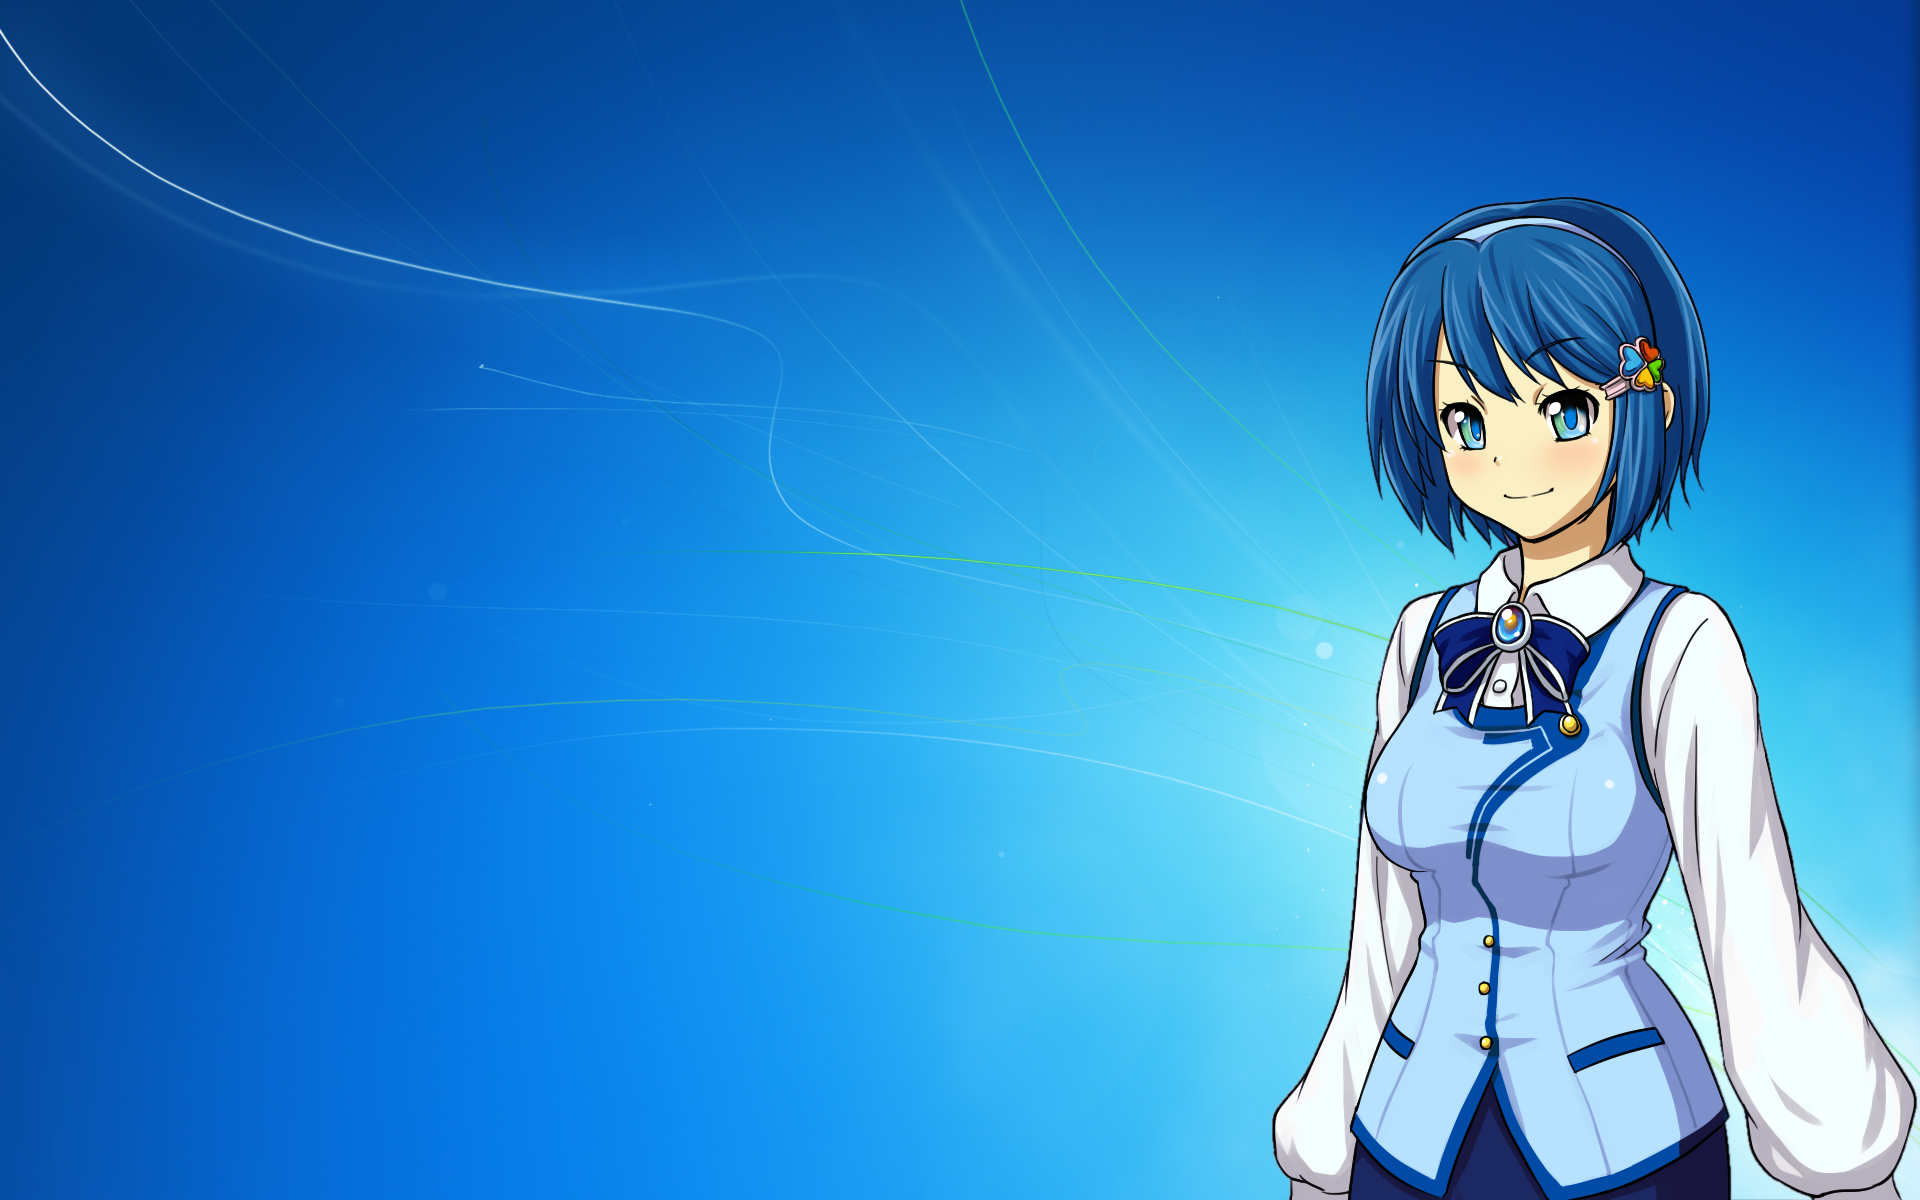 Anime-inspired desktop wallpaper featuring the adorable character, Os-tan.